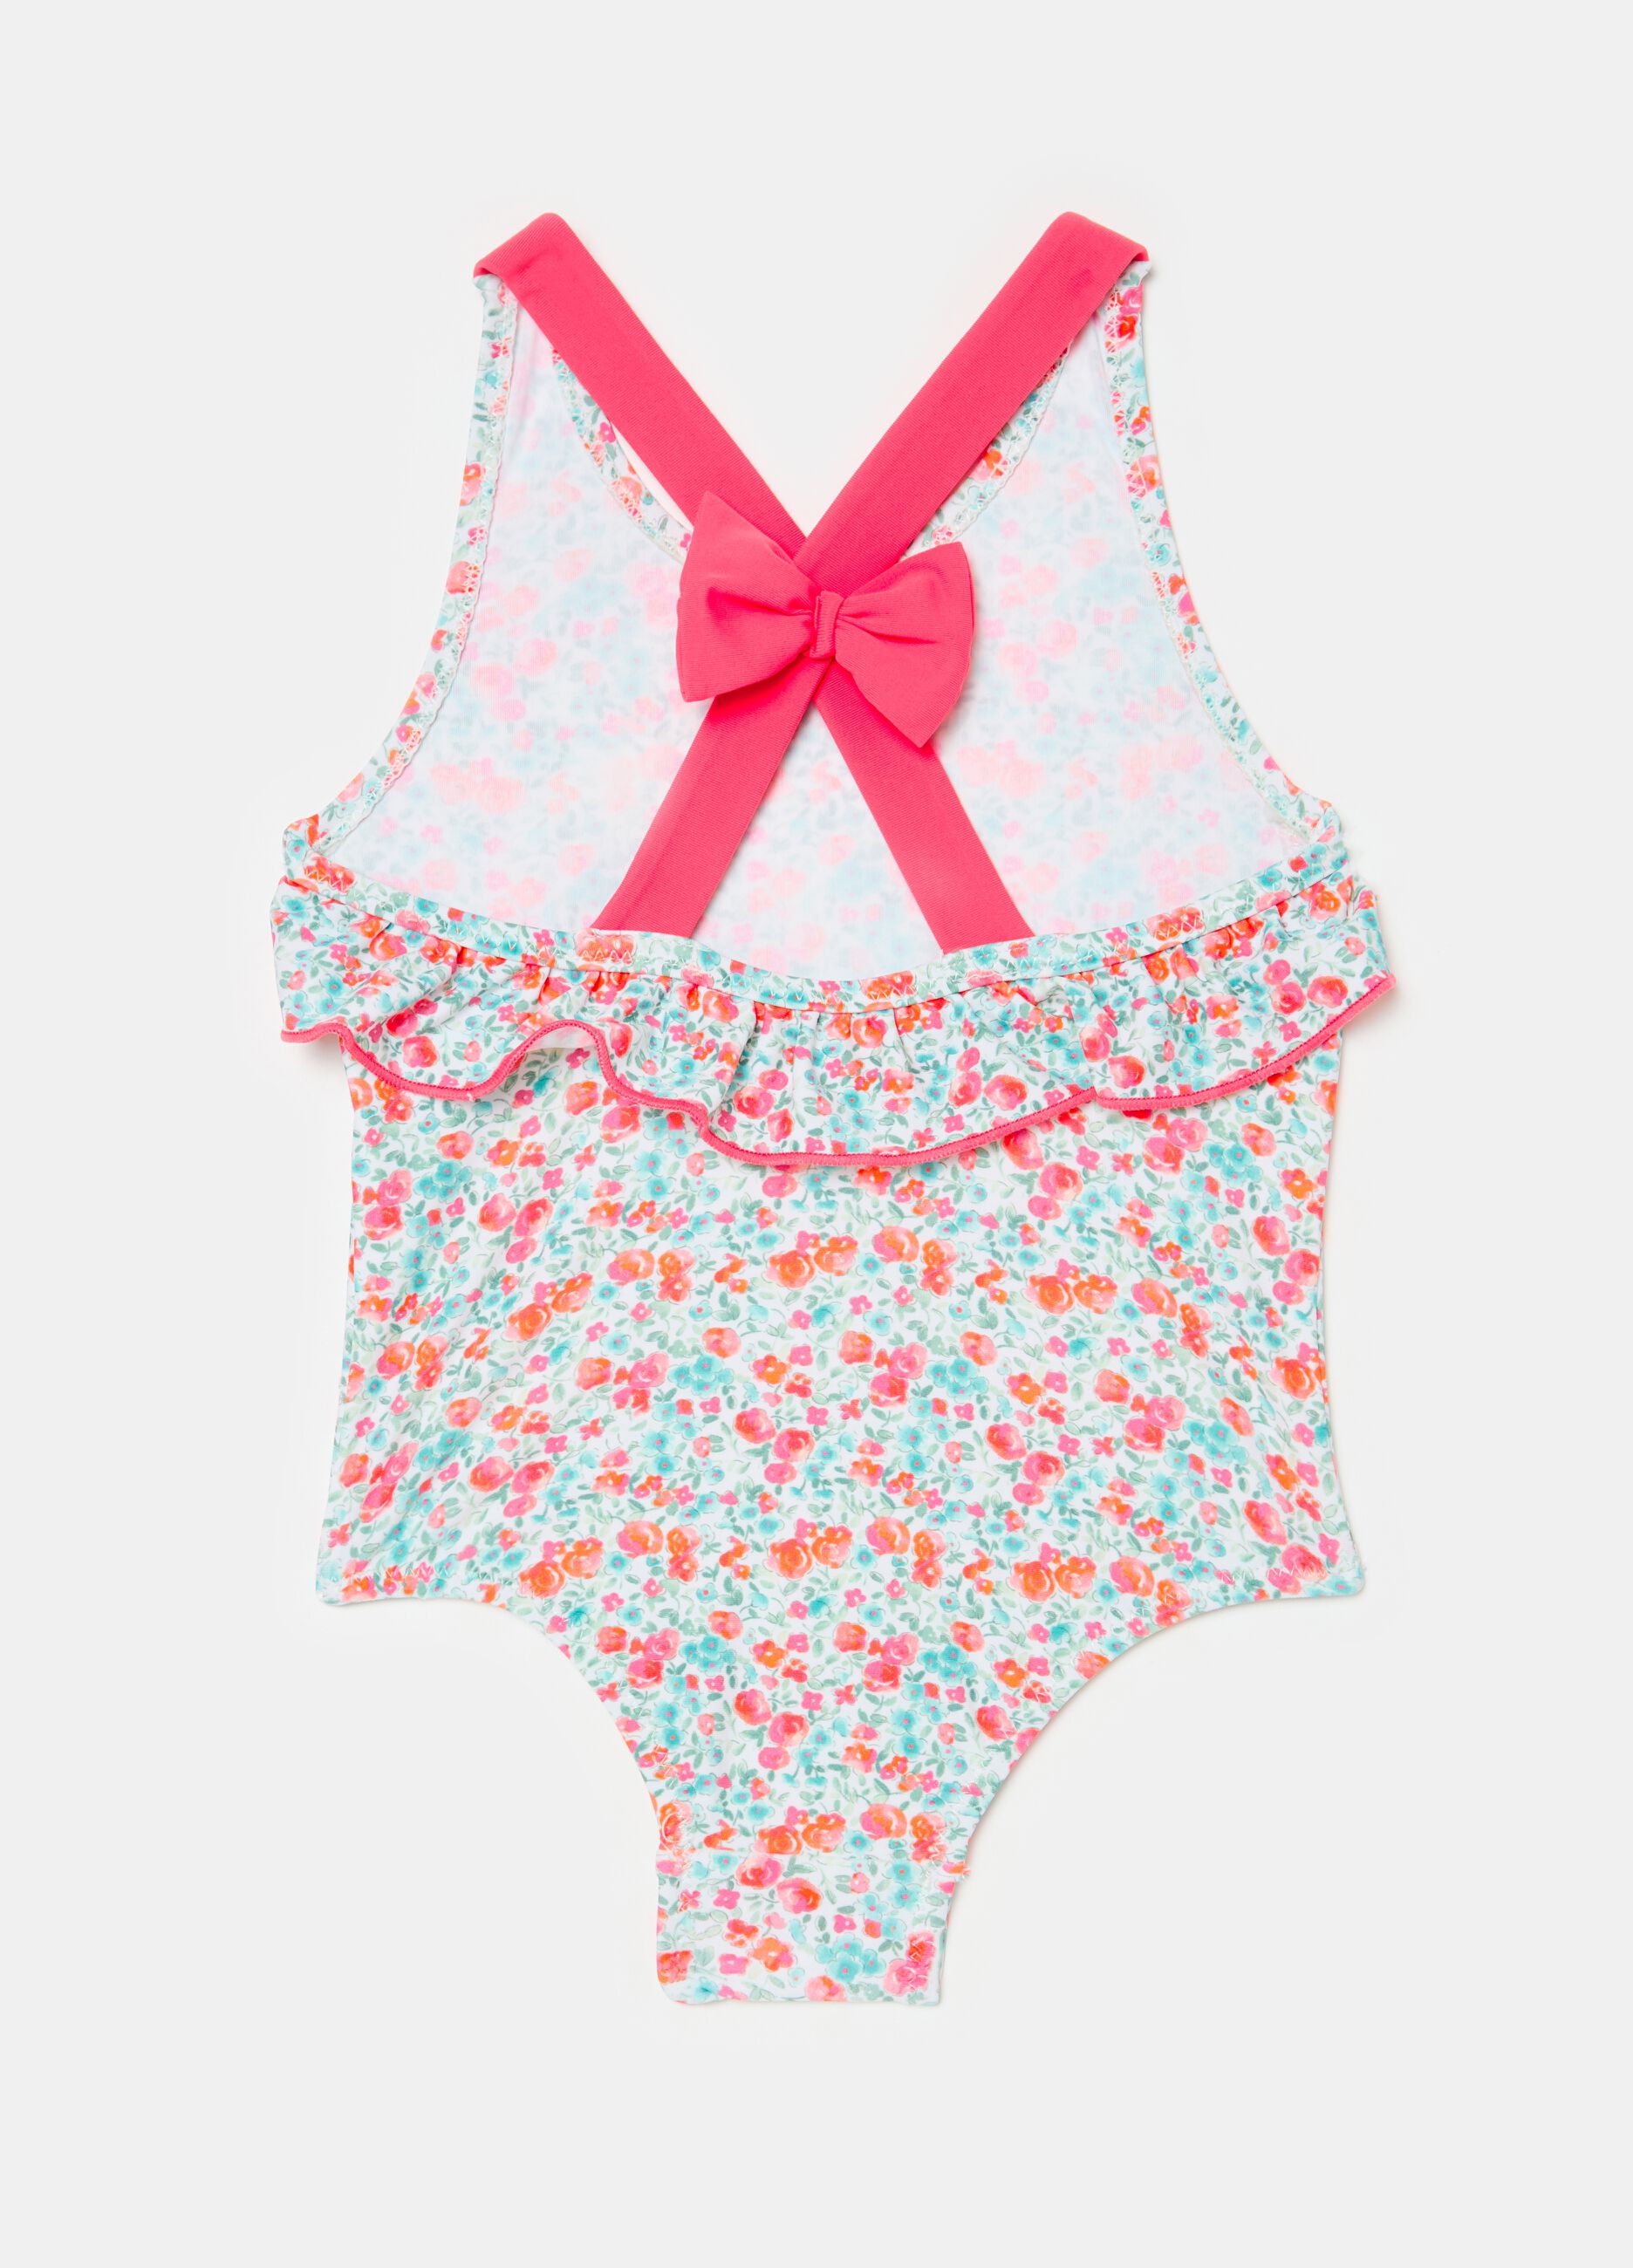 One-piece swimsuit with floral pattern and bow